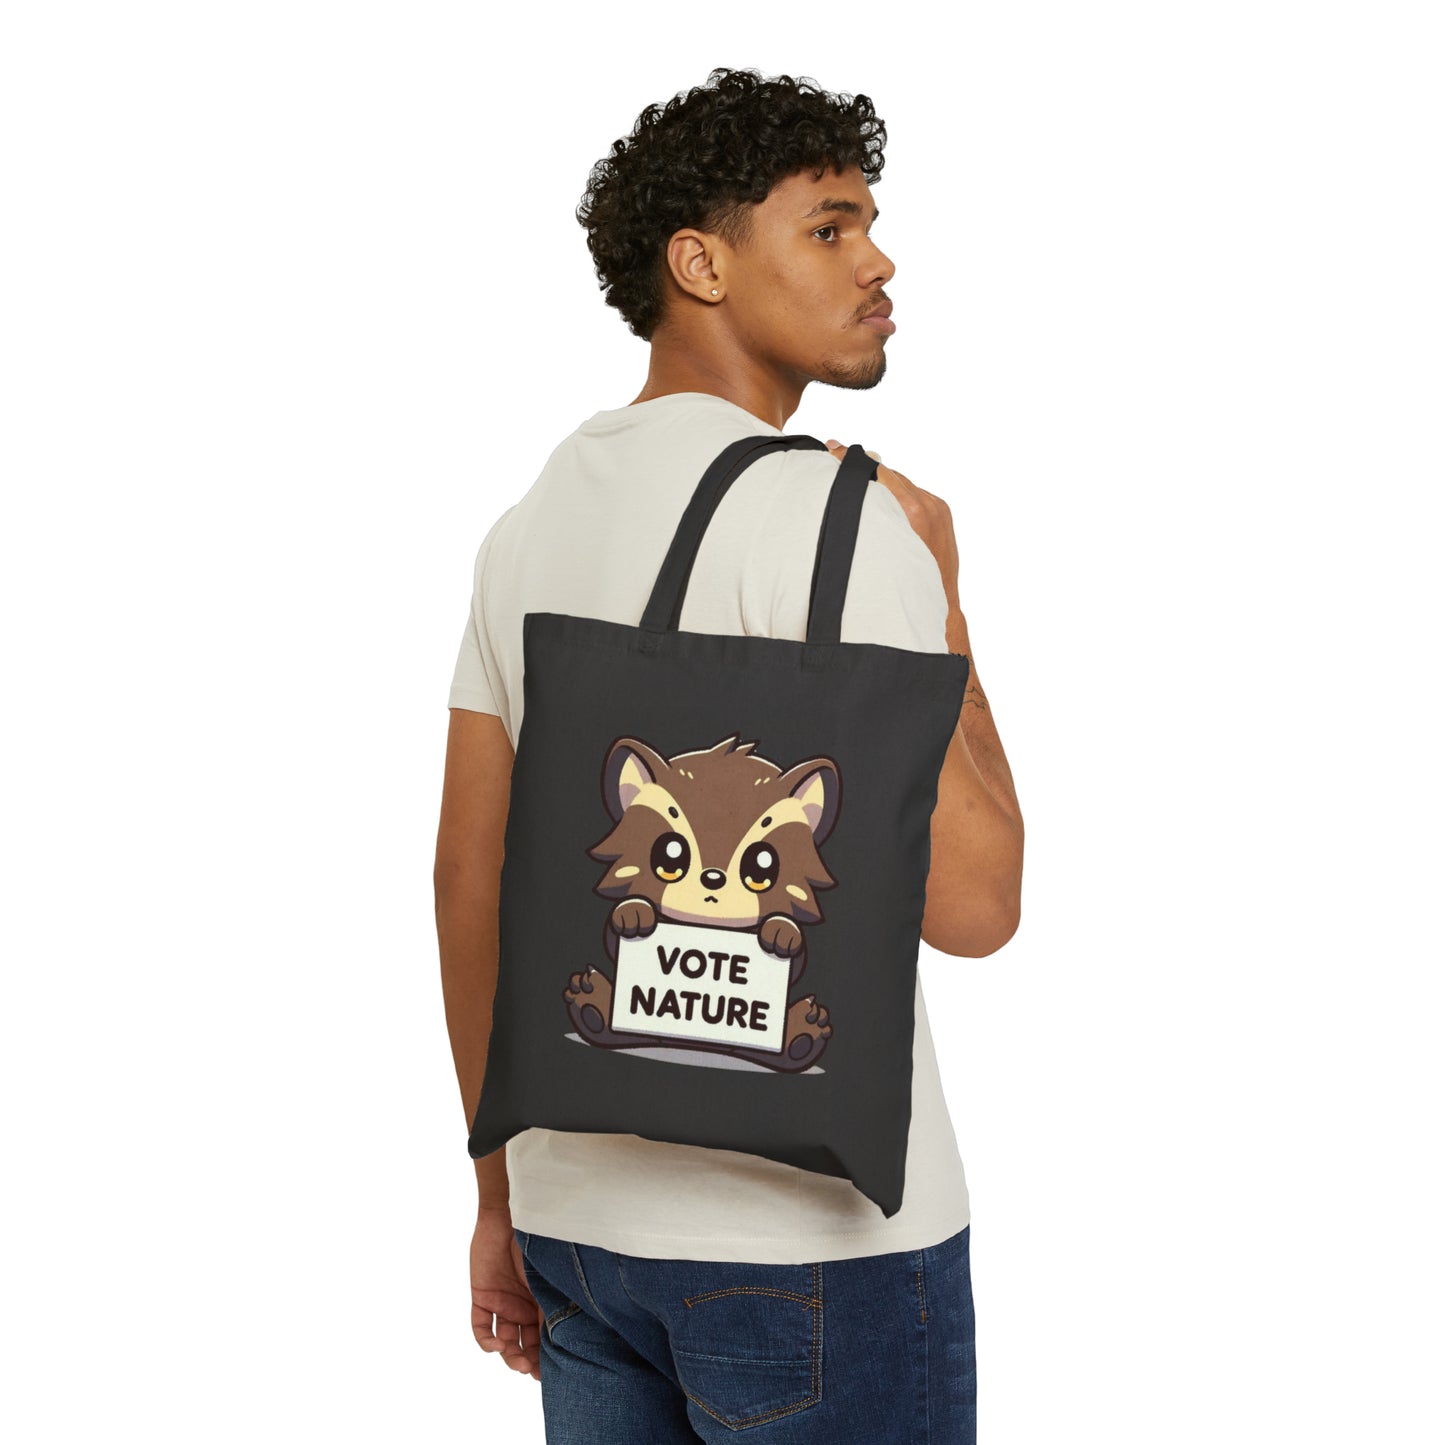 Inspirational Cute Wolverine Statement Cotton Canvas Tote Bag: Vote Nature! carry a laptop, kindle, notebook, goodies to work/coffee shop